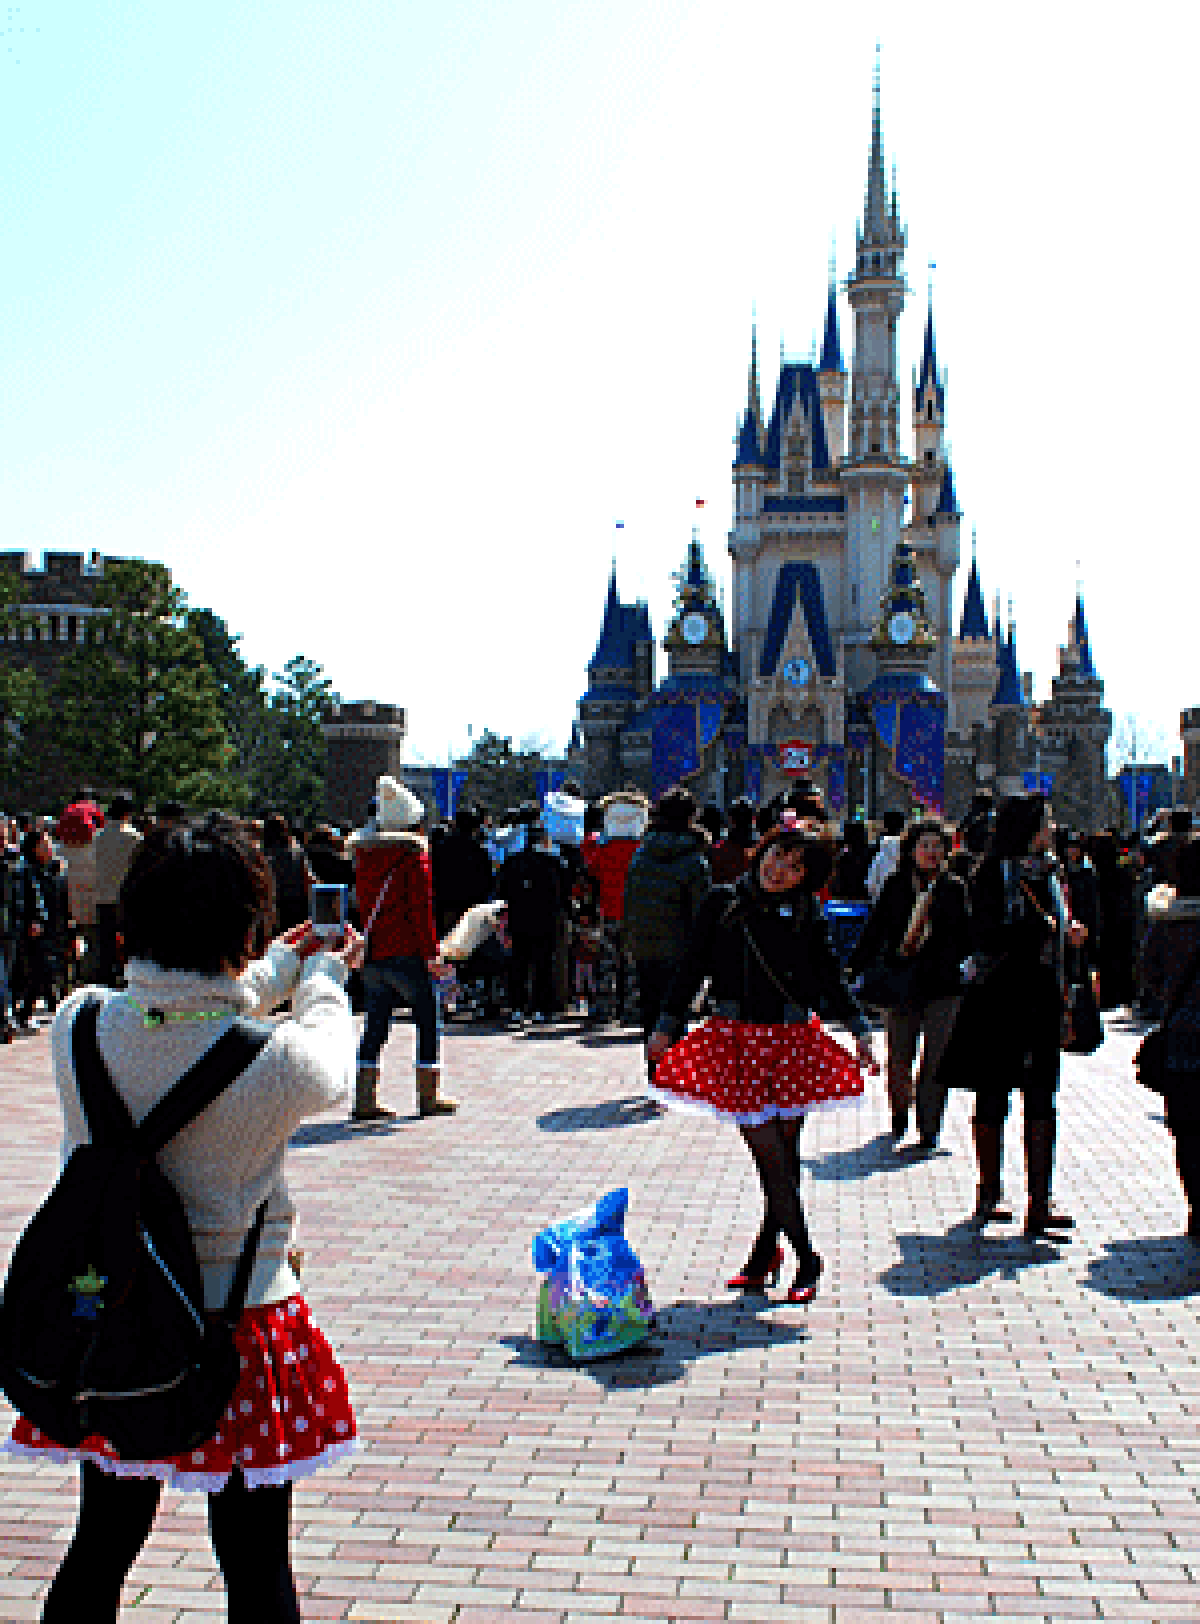 The Japanese are mad about the Mouse. Tokyo Disneyland has set revenue and attendance records.